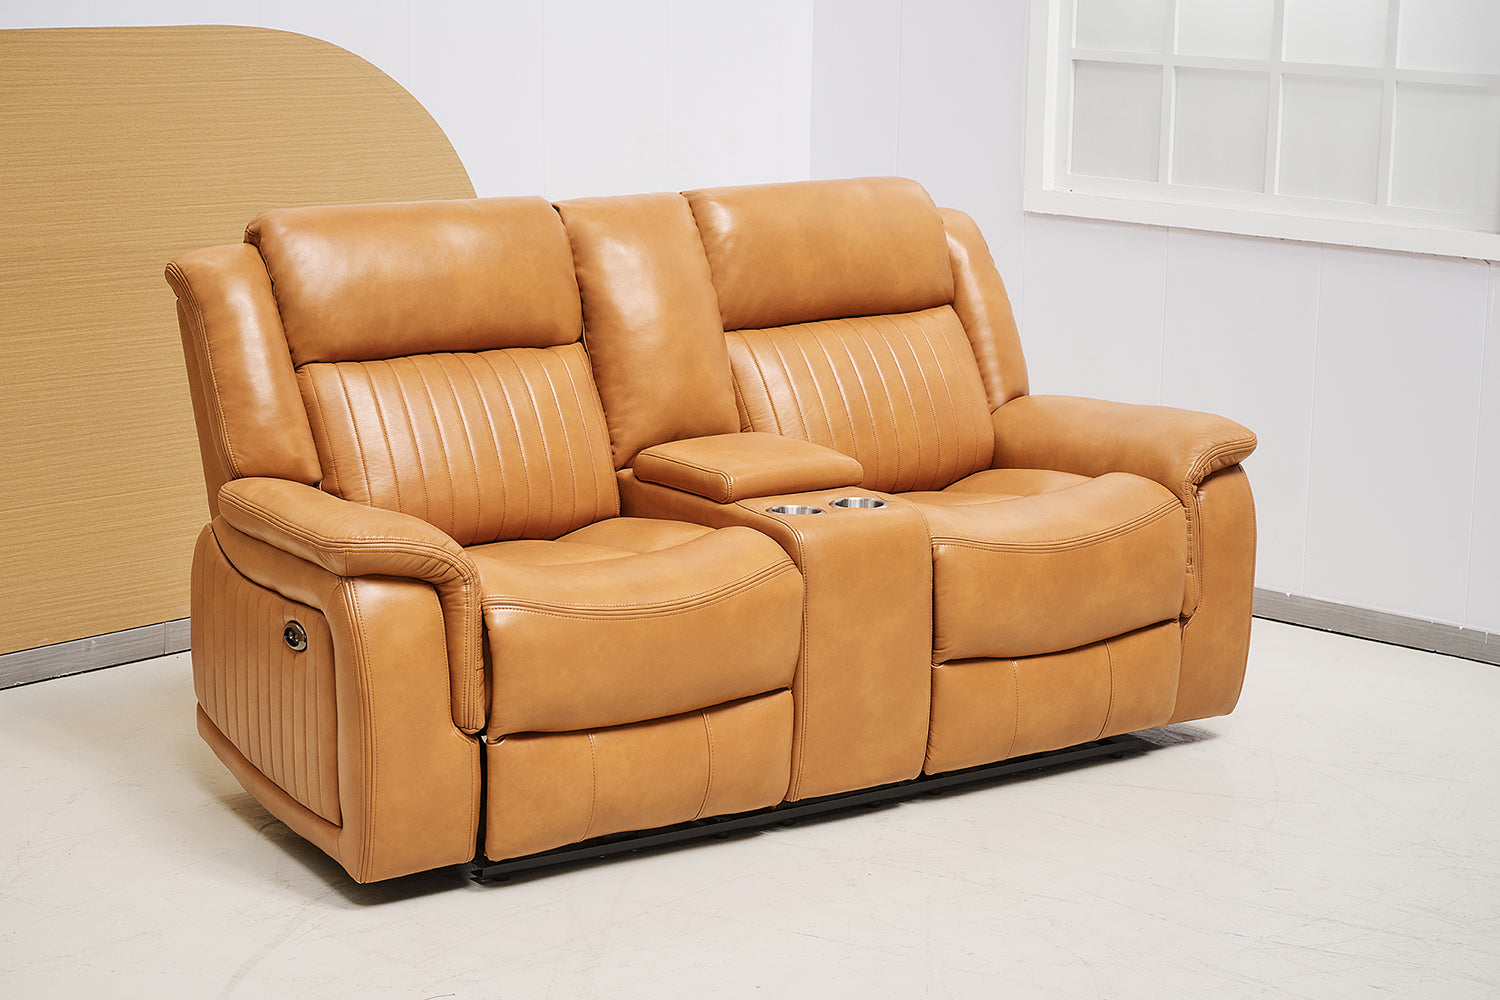 BT Paragon PU Leather Upholstered  2 Seater Electric Recliner Lounge